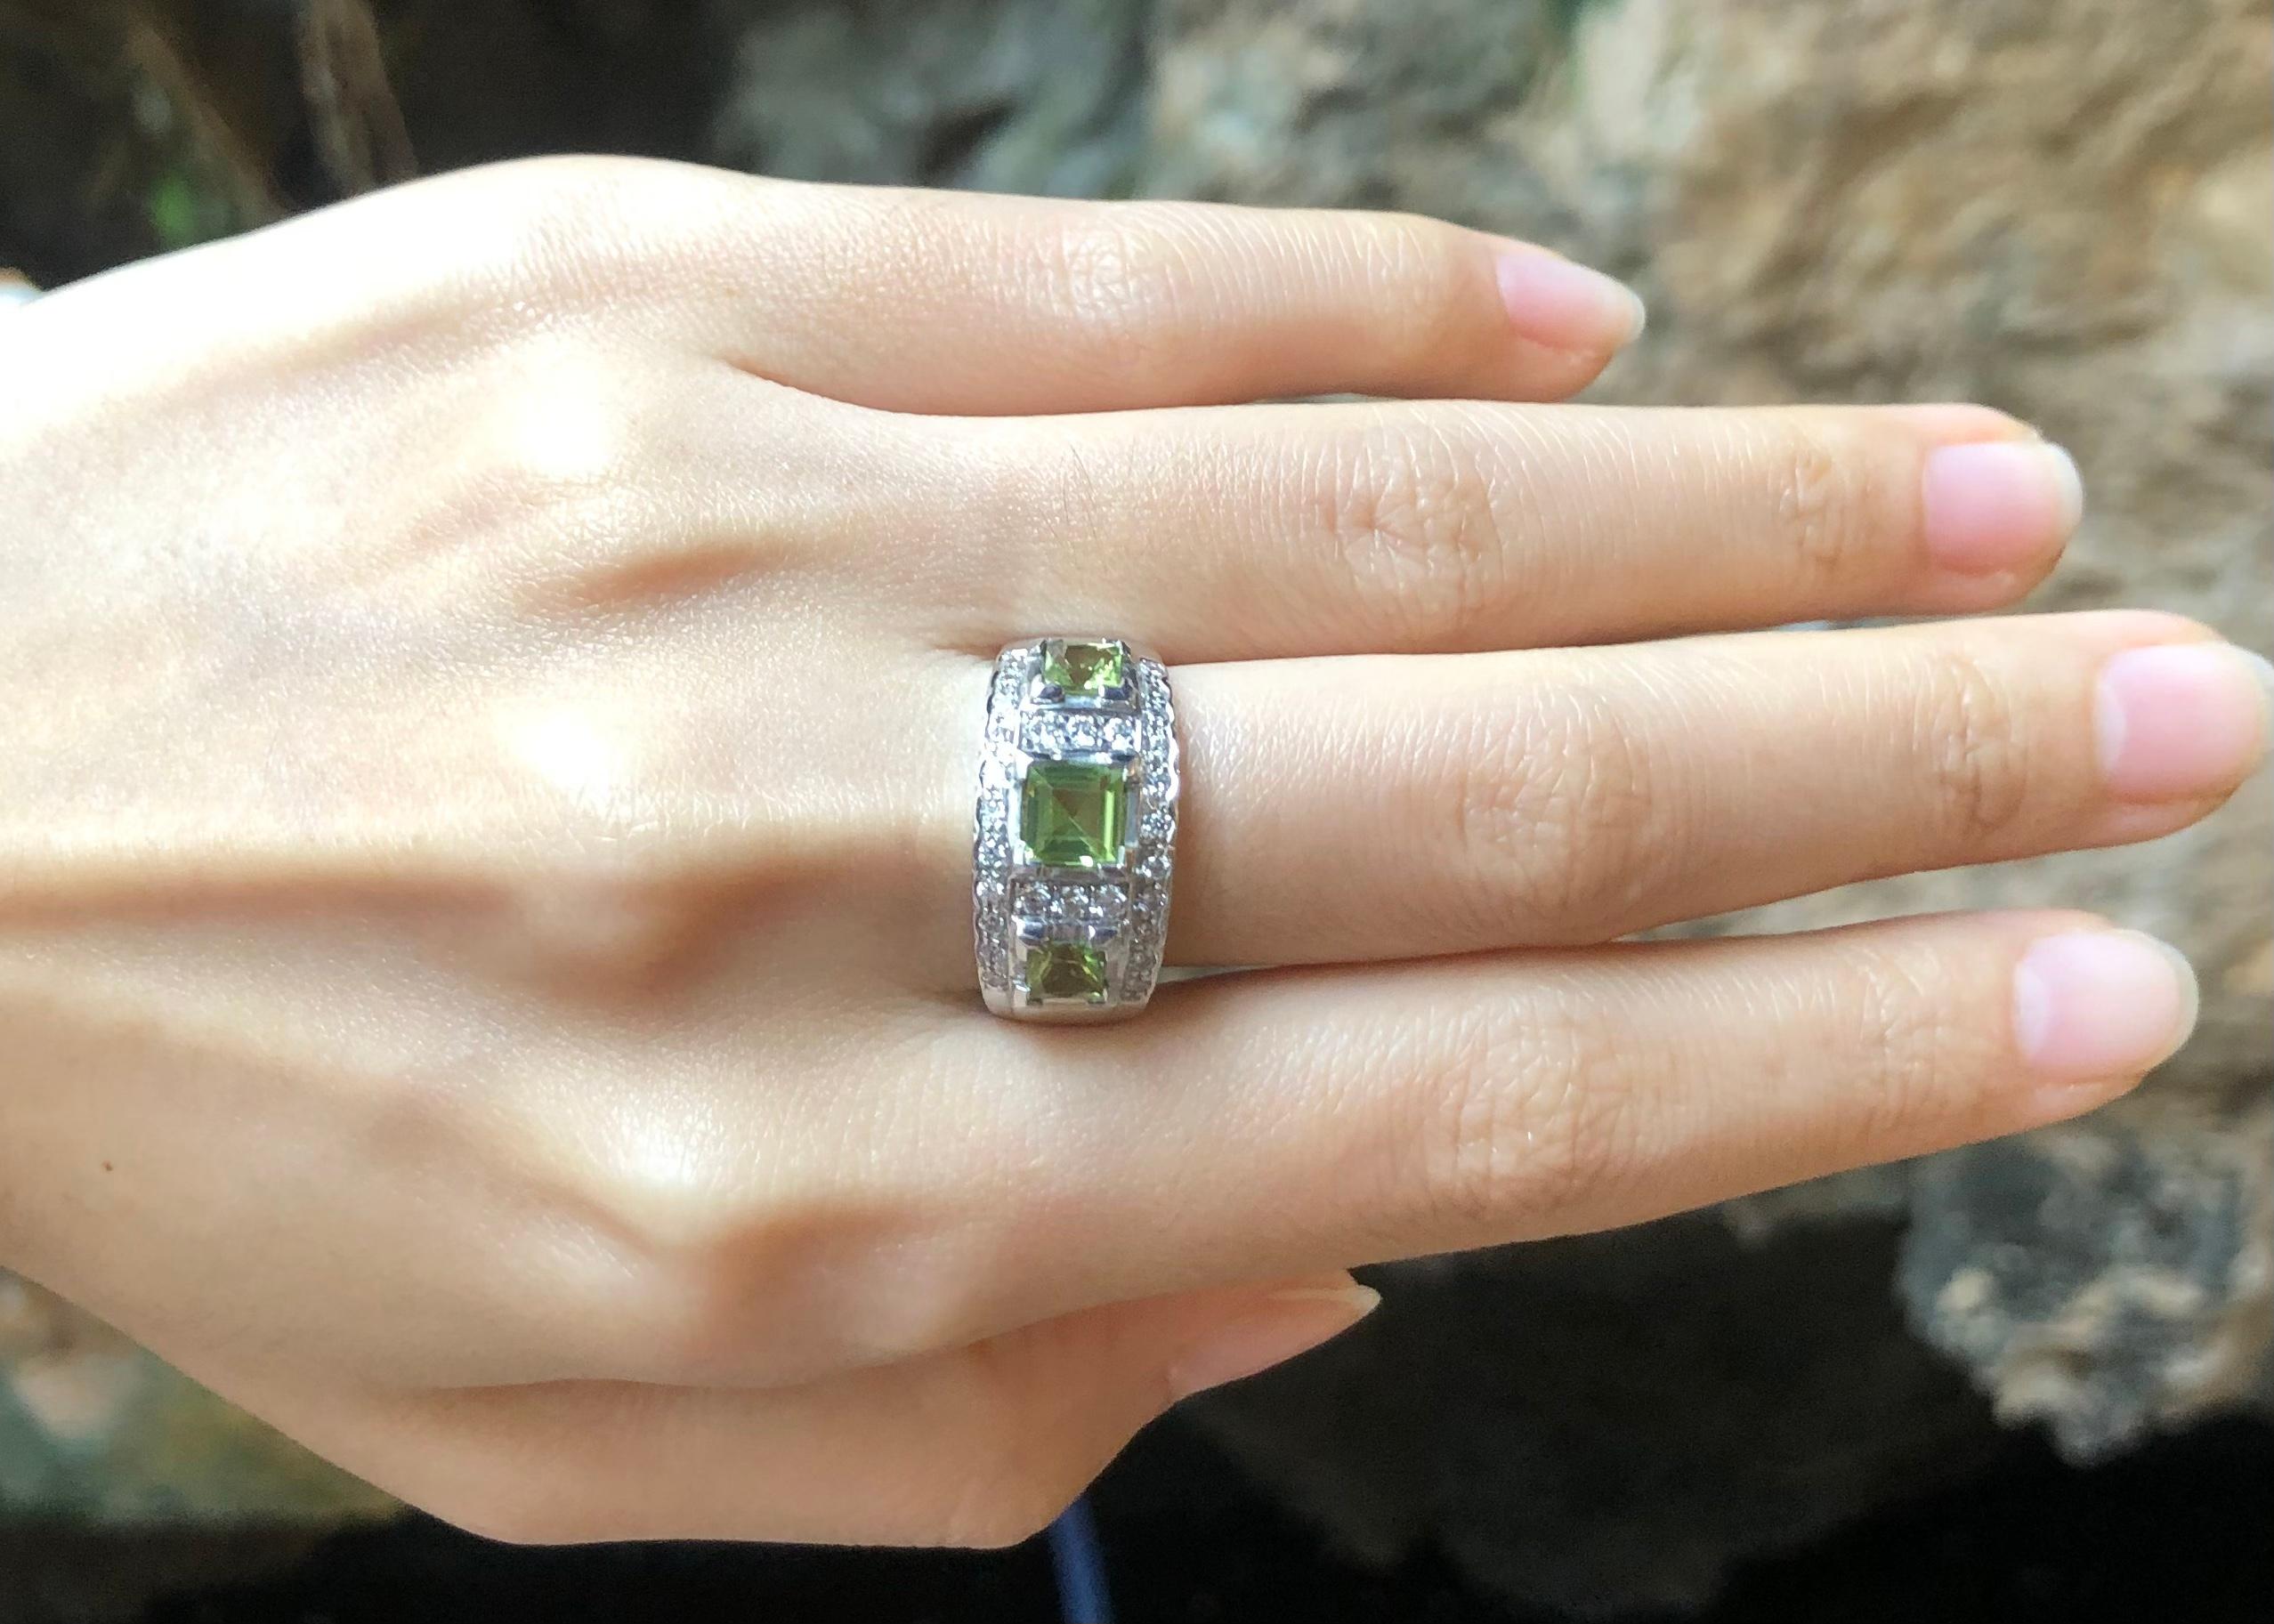 Peridot with Cubic Zirconia Ring set in Silver Settings

Width:  1.9 cm 
Length: 1.0 cm
Ring Size: 58
Total Weight: 6.04 grams

*Please note that the silver setting is plated with rhodium to promote shine and help prevent oxidation.  However, with